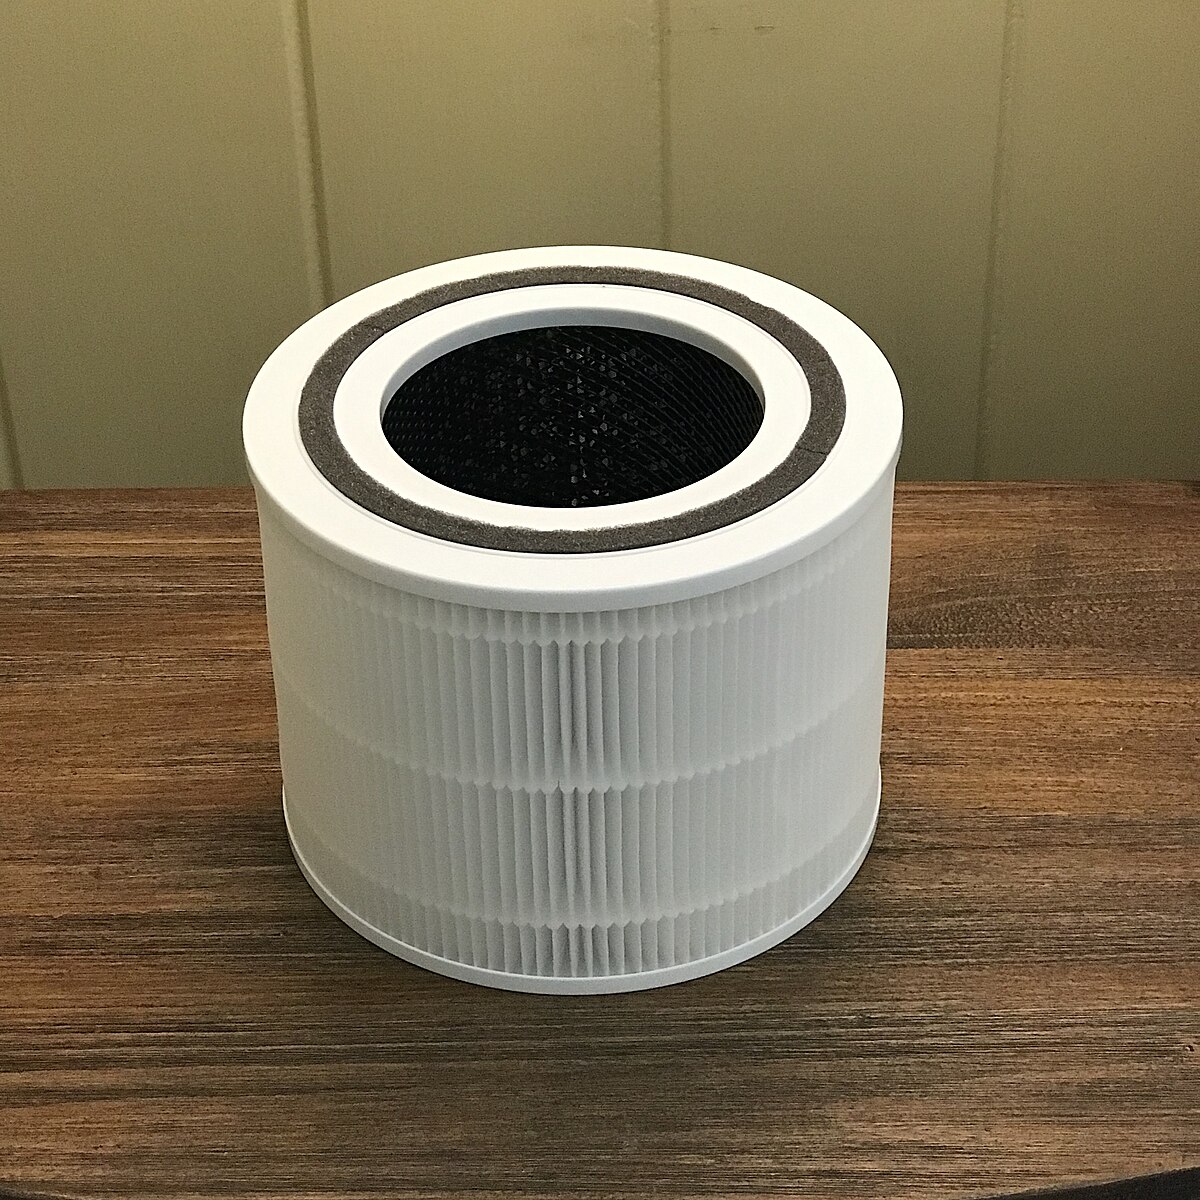 https://upload.wikimedia.org/wikipedia/commons/thumb/a/a9/Circular_HEPA_air_filter_%26_activated_carbon_filter_%281%29.jpg/1200px-Circular_HEPA_air_filter_%26_activated_carbon_filter_%281%29.jpg